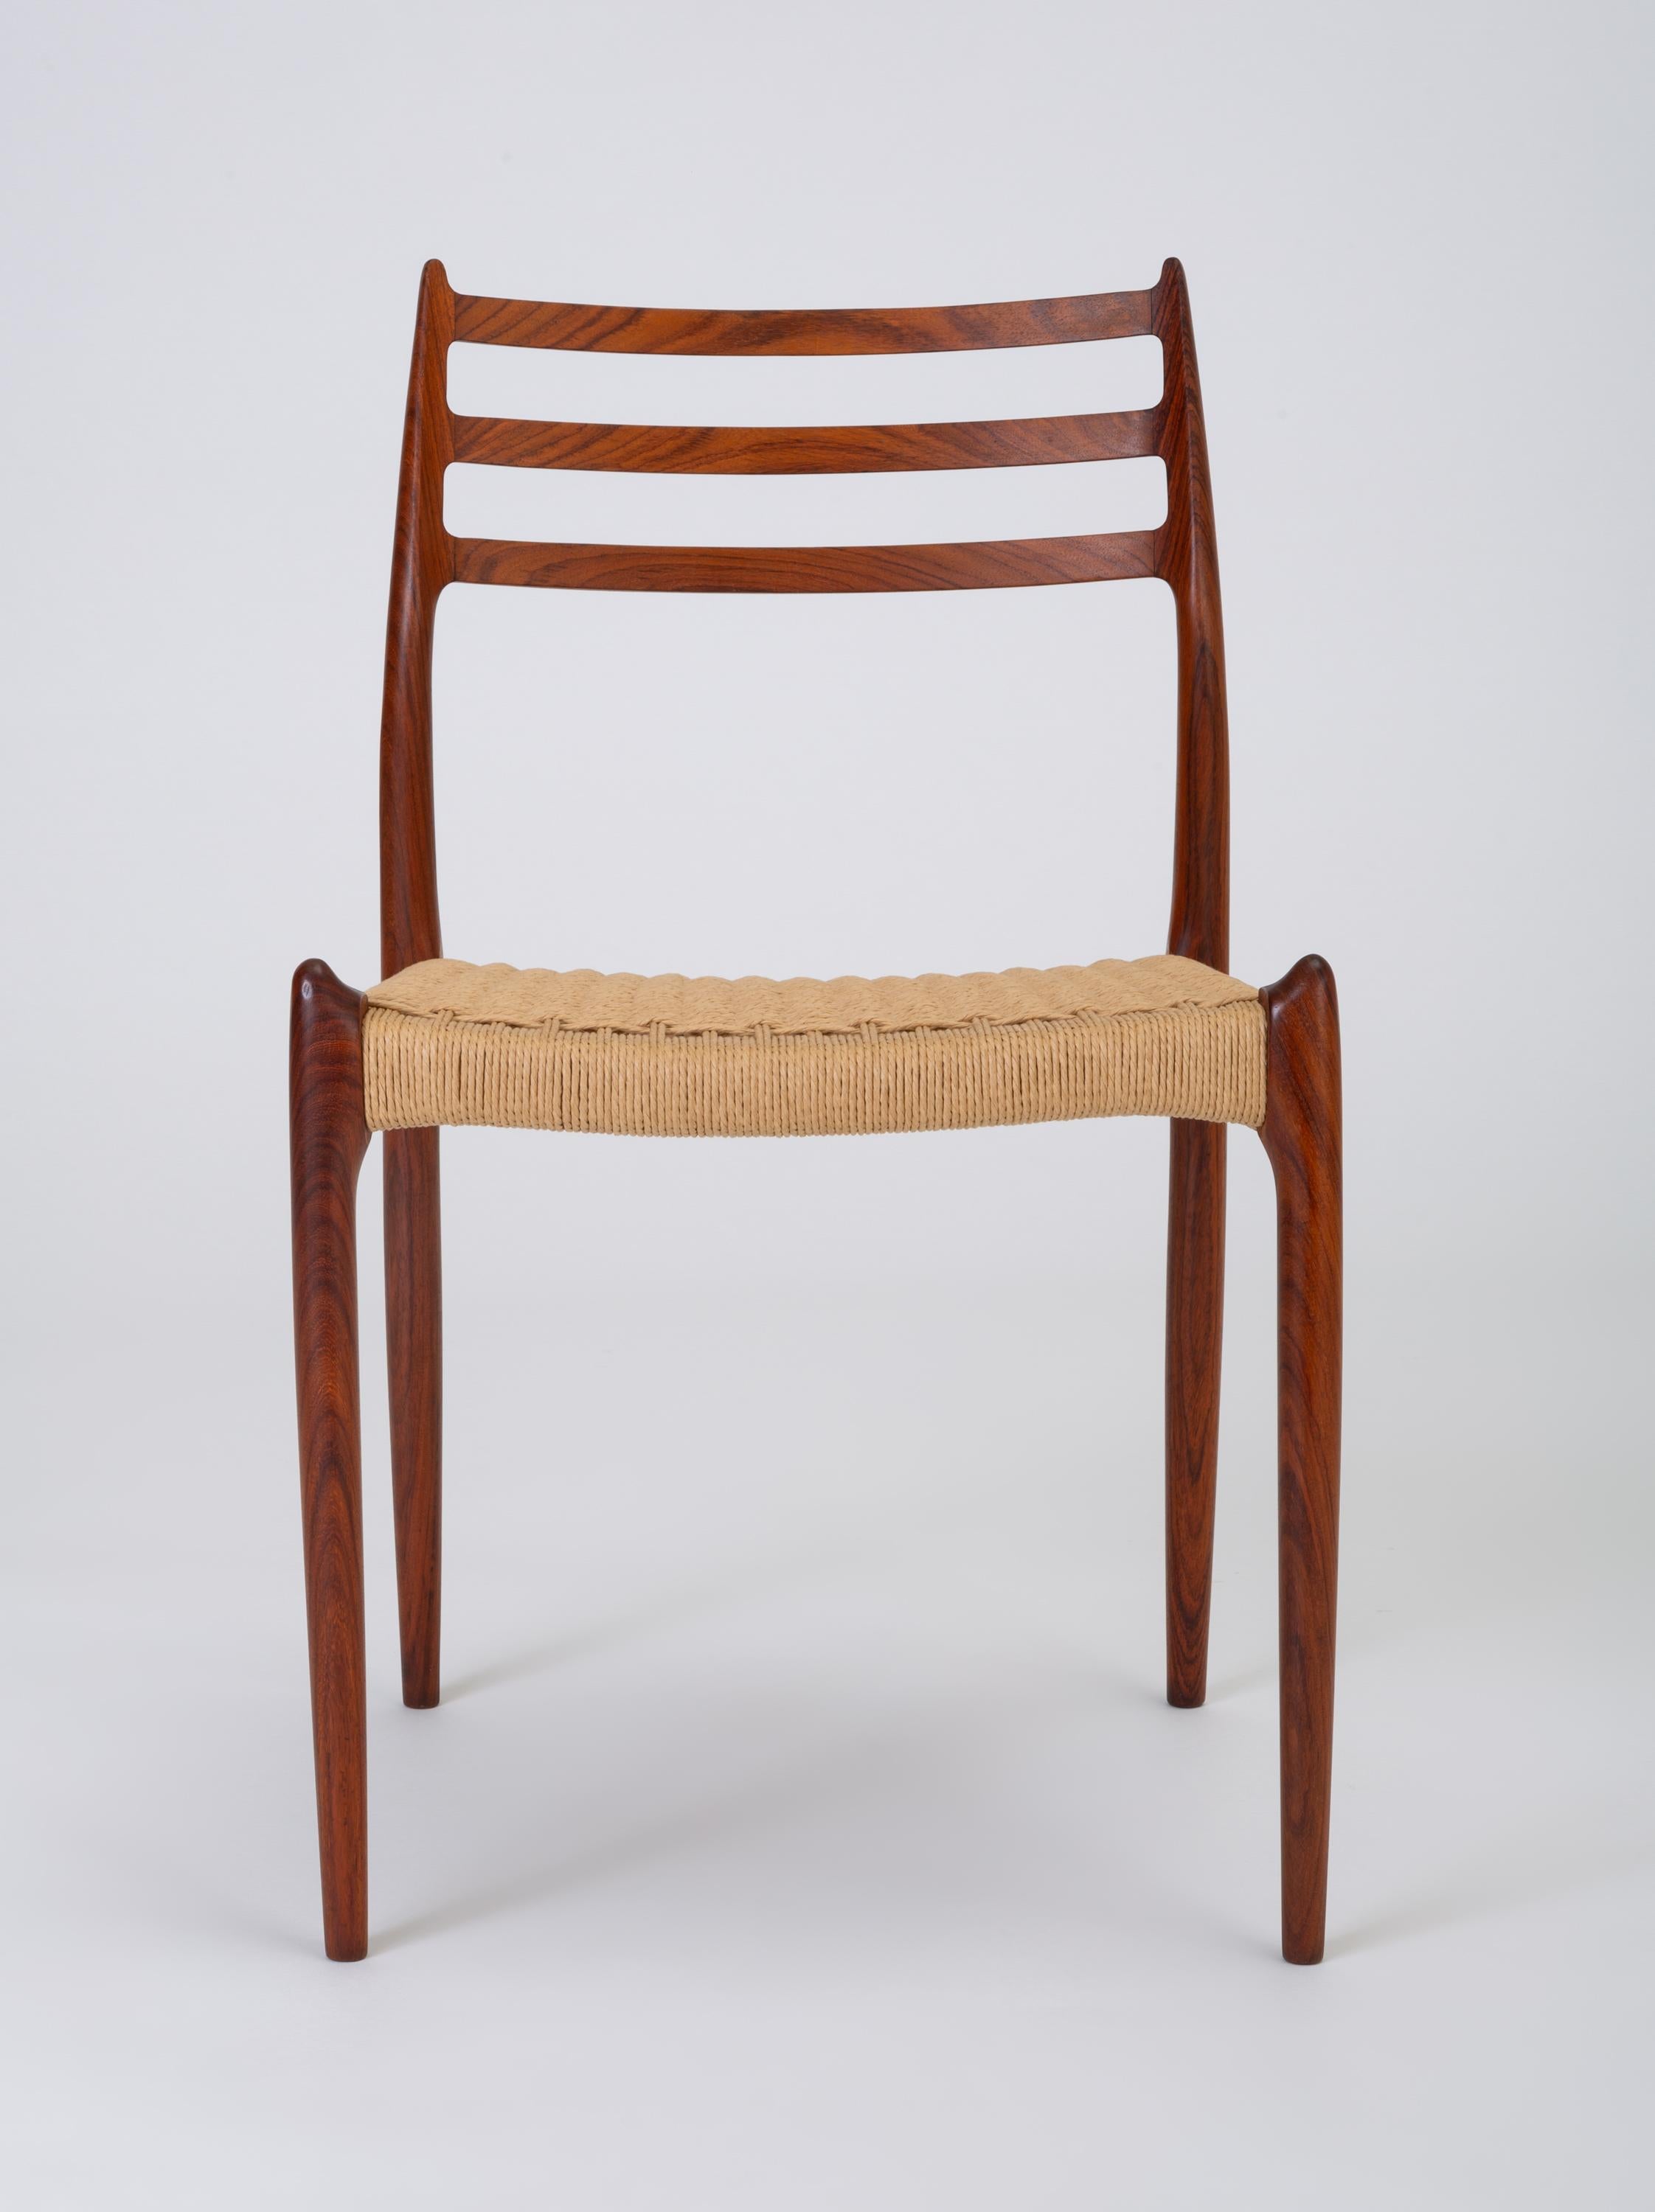 A set of six rosewood dining chairs designed by Niels Otto Møller in 1962 and manufactured by JL Møllers Møbelfabrik of Denmark with Danish [paper] cord seats. The chairs have a curved backrest with three horizontal supports, terminating in a